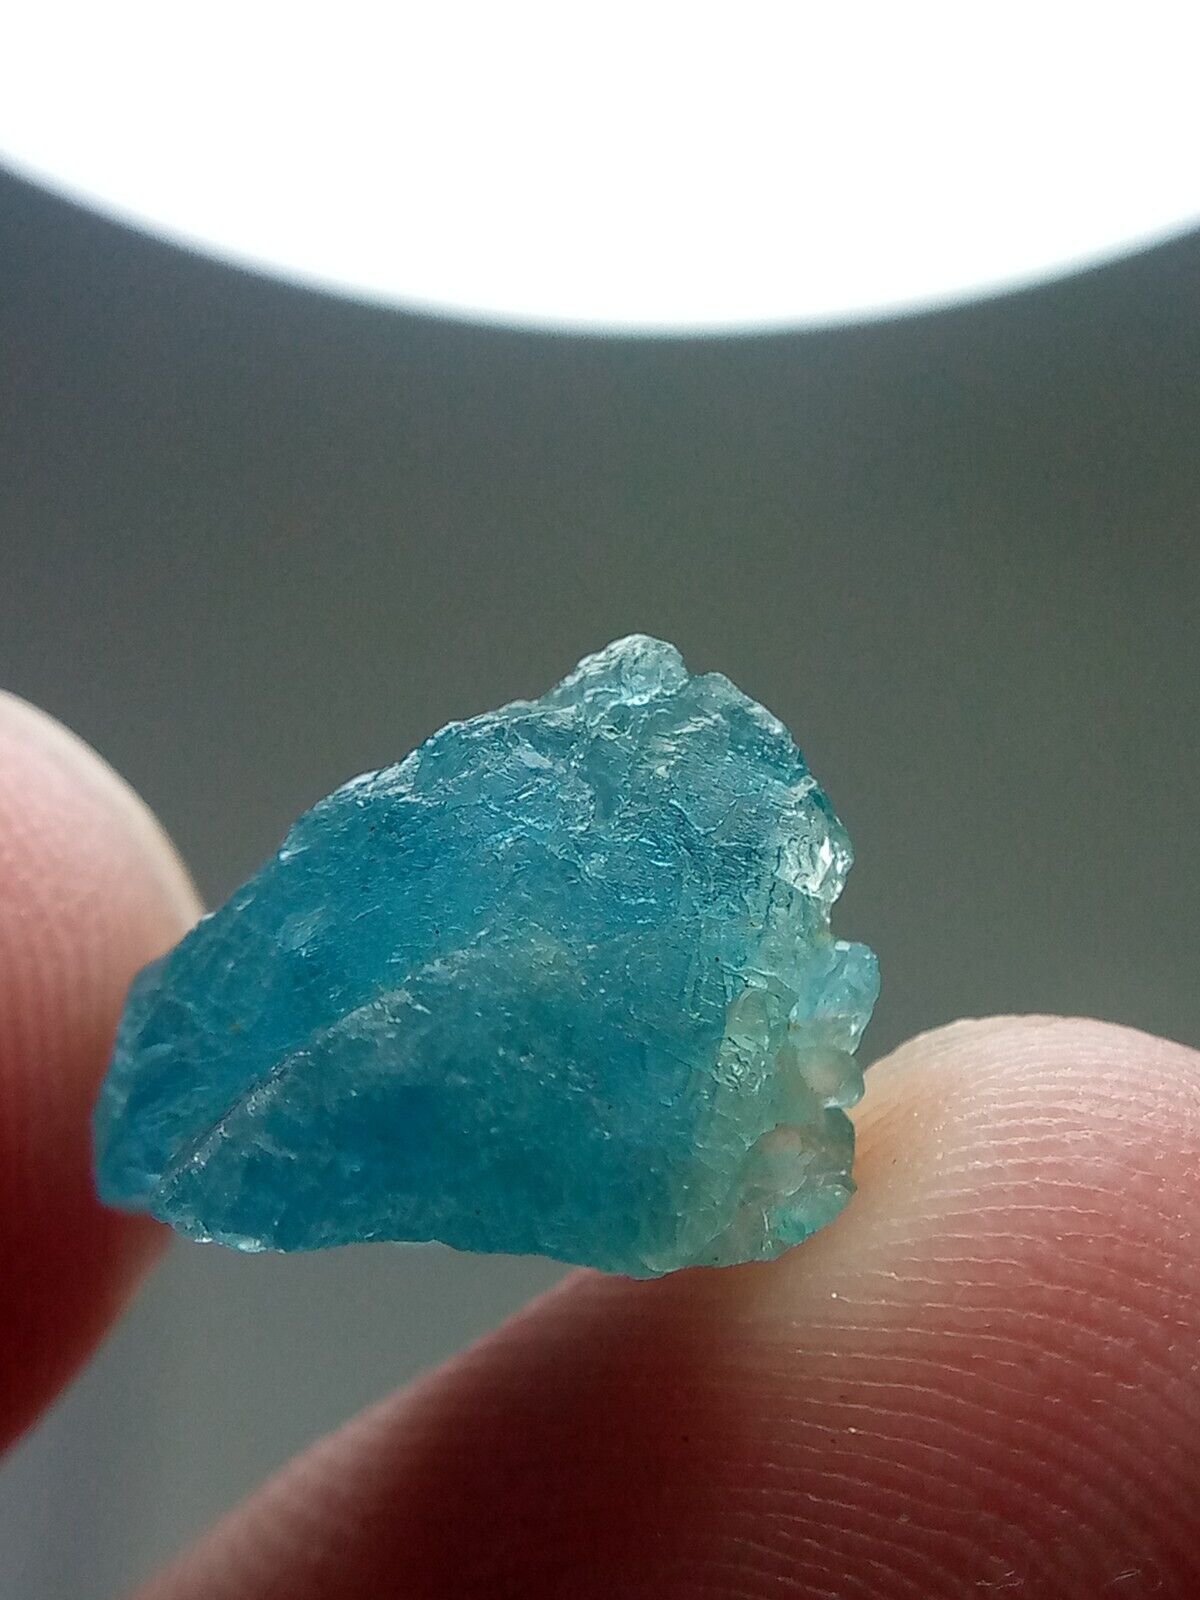 7.30Cts Extremely Rare Etched Gemmy Amazing Blue Grandidierite Floater@Madagasca